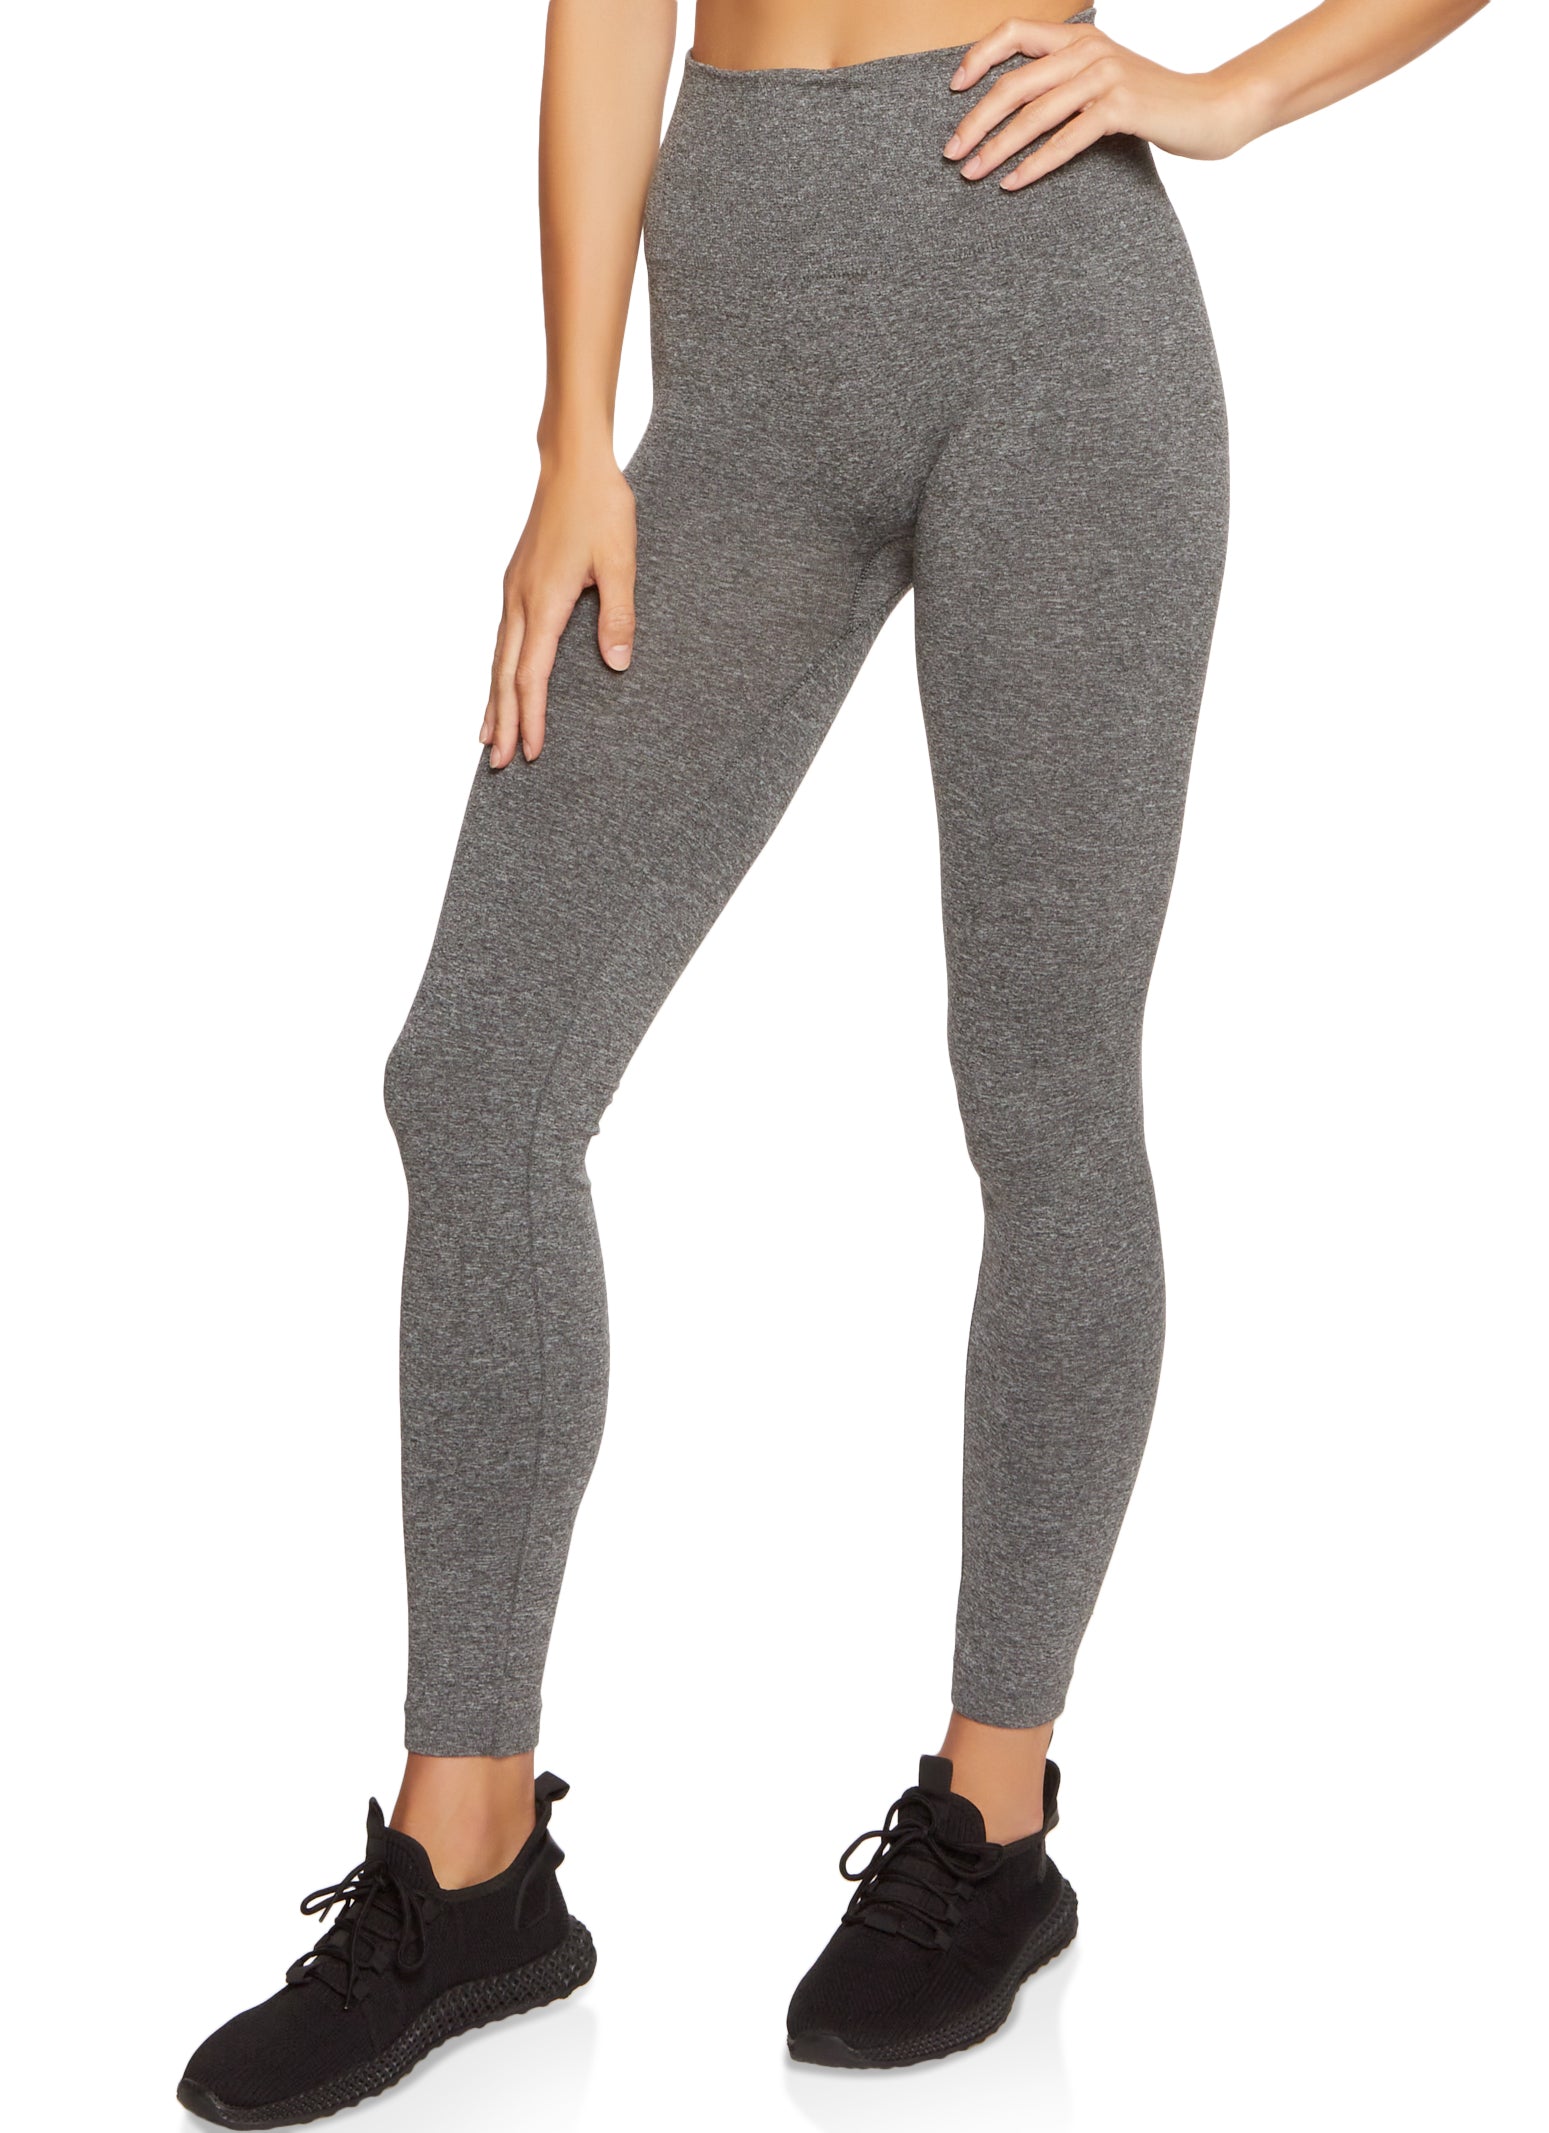 Look At Me Now High-Waisted Seamless Leggings Size Medium